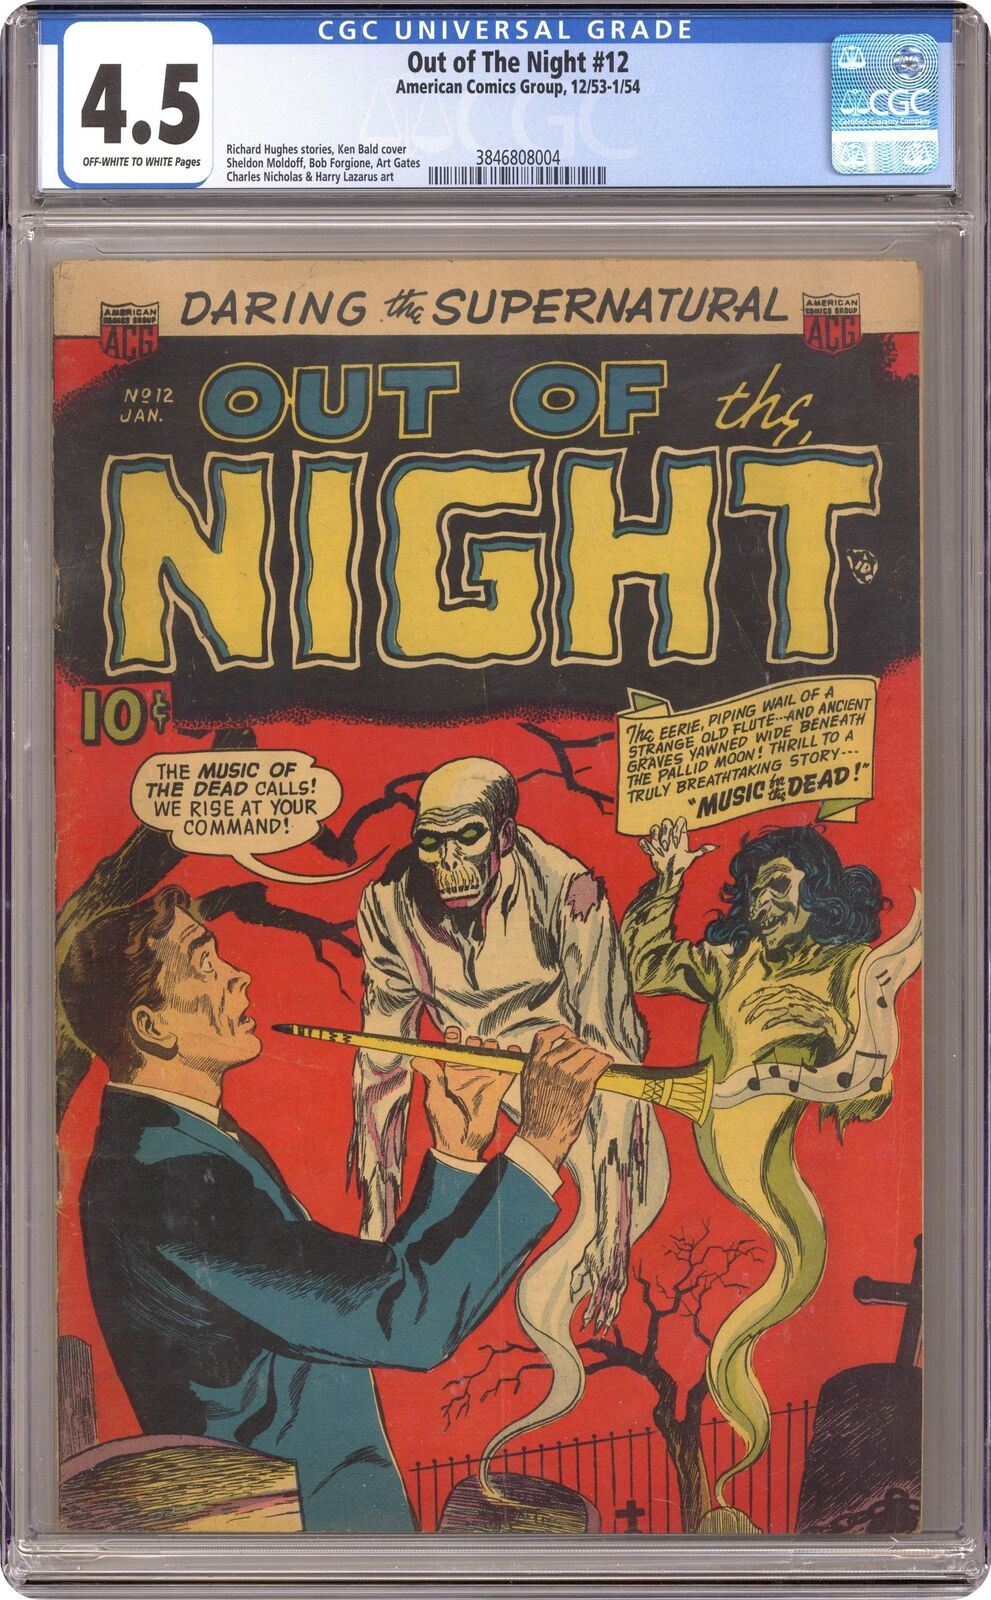 Out of the Night #12 CGC 4.5 1954 3846808004